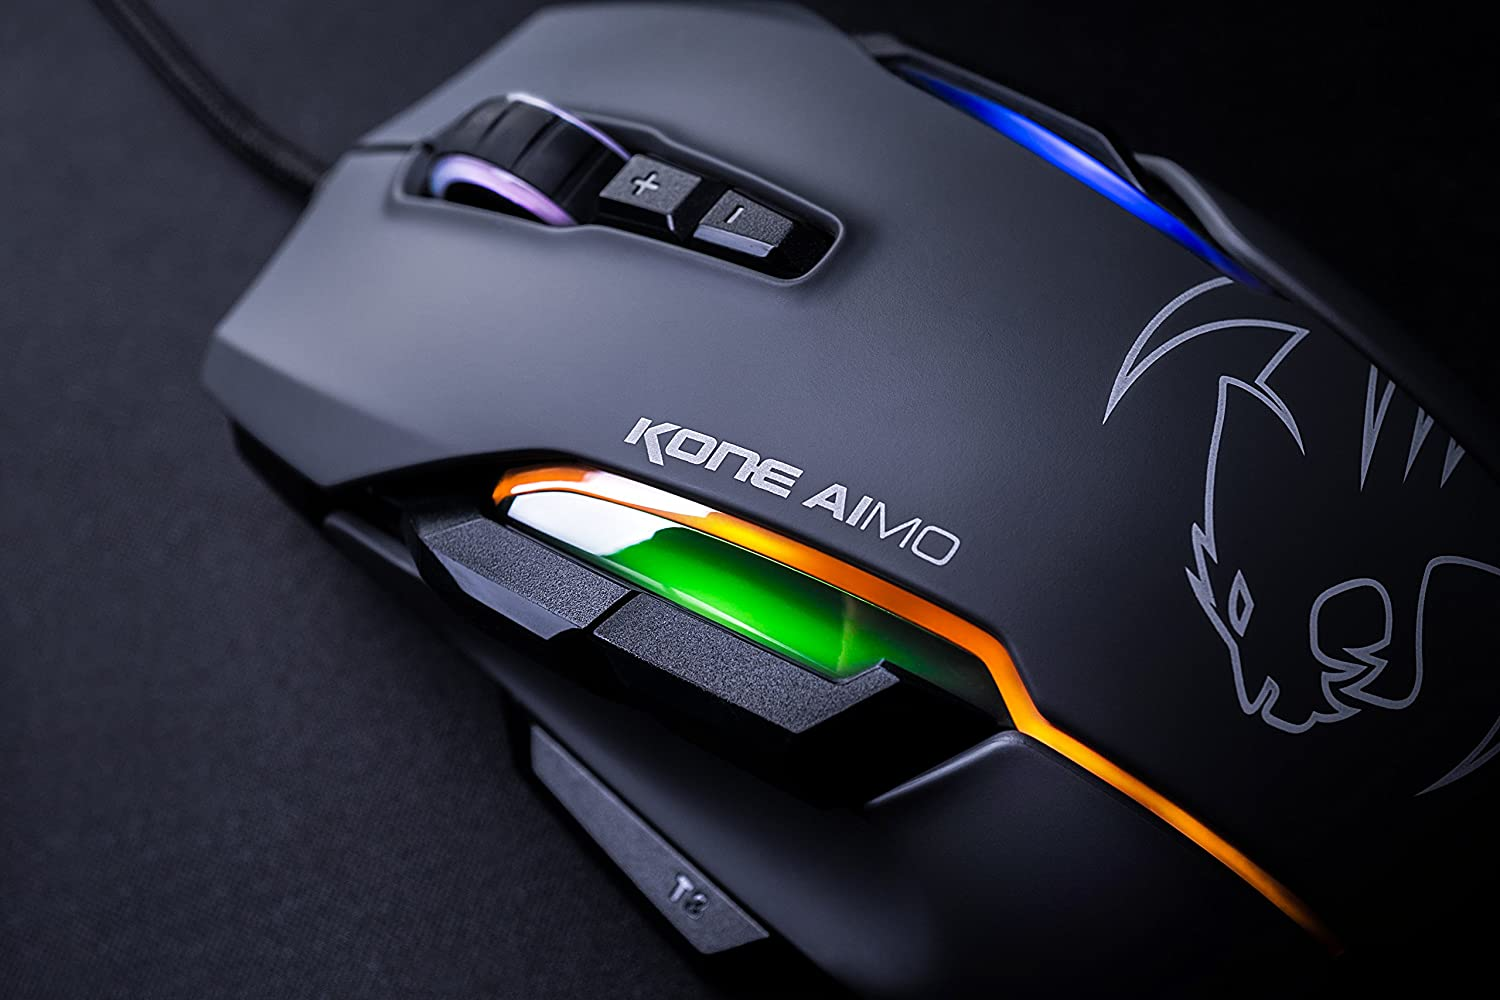 Ao80Ebpr Roccat Https://Youtu.be/Mfk3Bmiiu8C Roccat® Swarm Powered – Comprehensive Driver Suite With A Striking Design And A Stunning Feature Set, The Kone Aimo Channels The Legacy Of Its Predecessor. It Boasts Refined Ergonomics With Enhanced Button Distinction, But What Truly Sets It Apart Is Its Rgba Double Lightguides Powered By The State-Of-The-Art Aimo Intelligent Lighting System. Aimo Is The Vivid Illumination Eco-System From Roccat®. Its Functionality Grows Exponentially Based On The Number Of Aimo-Enabled Devices Connected. It Also Reacts Intuitively And Organically To Your Computing Behavior. Eliminating The Need For Configuration, It Presents A State-Of-The-Art Lighting Scenario Right Out Of The Box, For A Completely Fluid, Next-Gen Experience. The Kone Aimo Features A Tri-Button Thumb Zone For A New And Even Greater Level Of Control. It Includes Two Wide Buttons Suitable For All Hand Sizes, Plus An Ergonomic Lower Button Set To Easy-Shift[+]™ By Default. Easy-Shift[+]™ Is The World-Famous Button Duplicator Technology That Lets You Assign A Secondary Function To The Mouse'S Buttons. It'S Easy To Program And Has Options For Simple Commands And Complex Macros. Roccat - ماوس ألعاب مخصص ذكي من Kone Aimo Rgba (أسود) 23 مفتاحًا قابلًا للبرمجة ، مصمم في ألمانيا